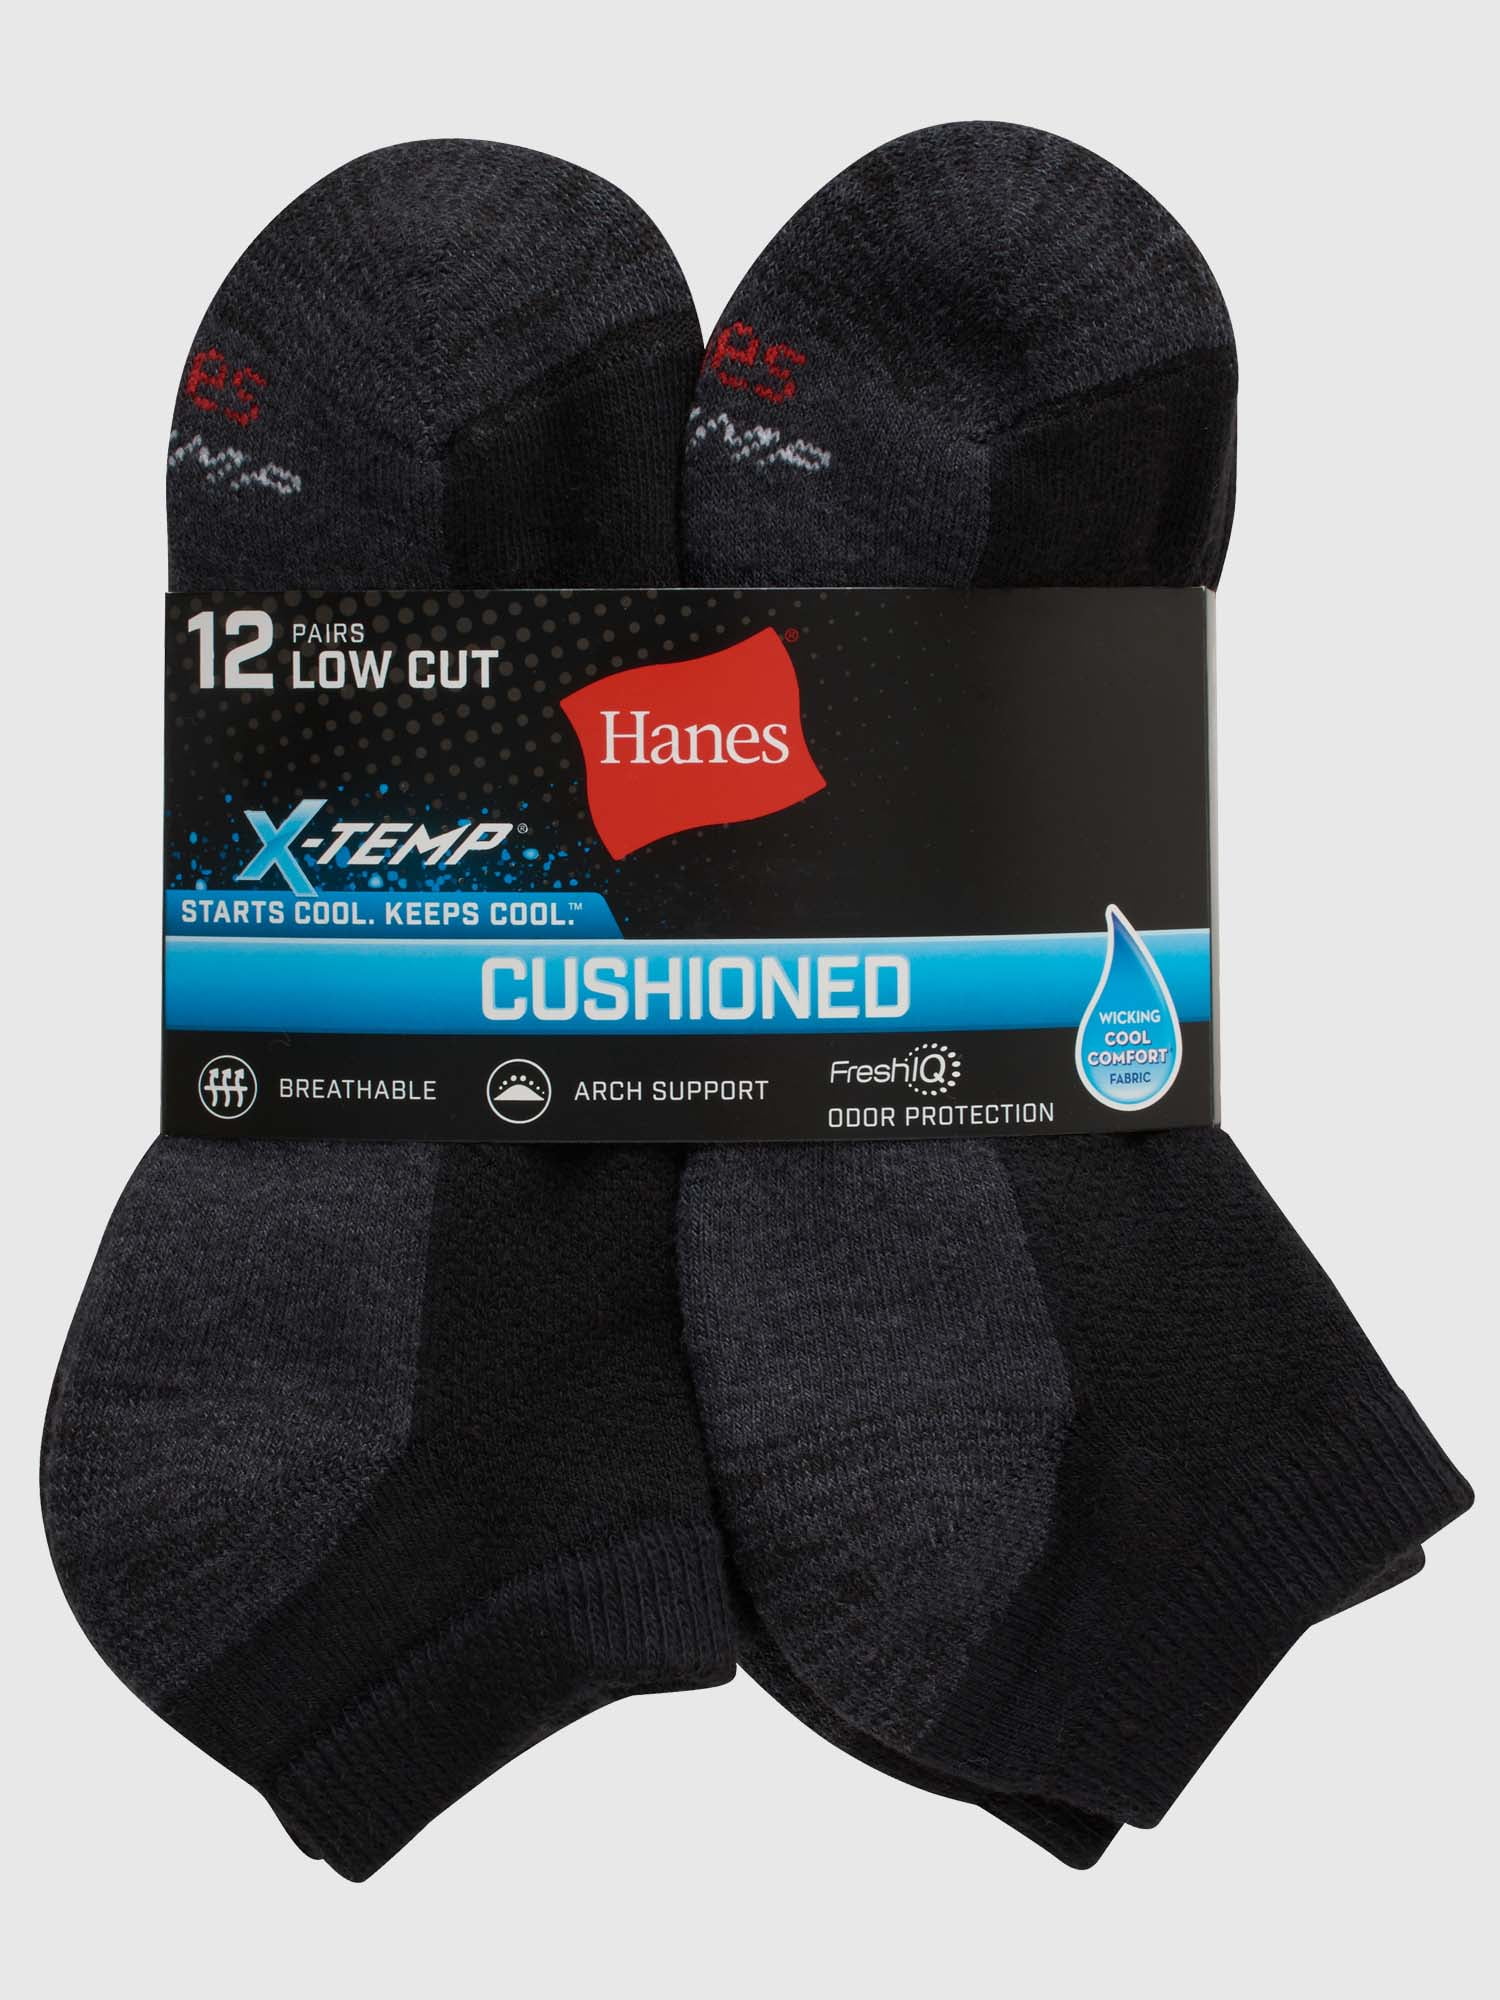 Hanes Men's X-Temp Cushioned with Arch & Vent Low Cut Socks, 12 Pack 